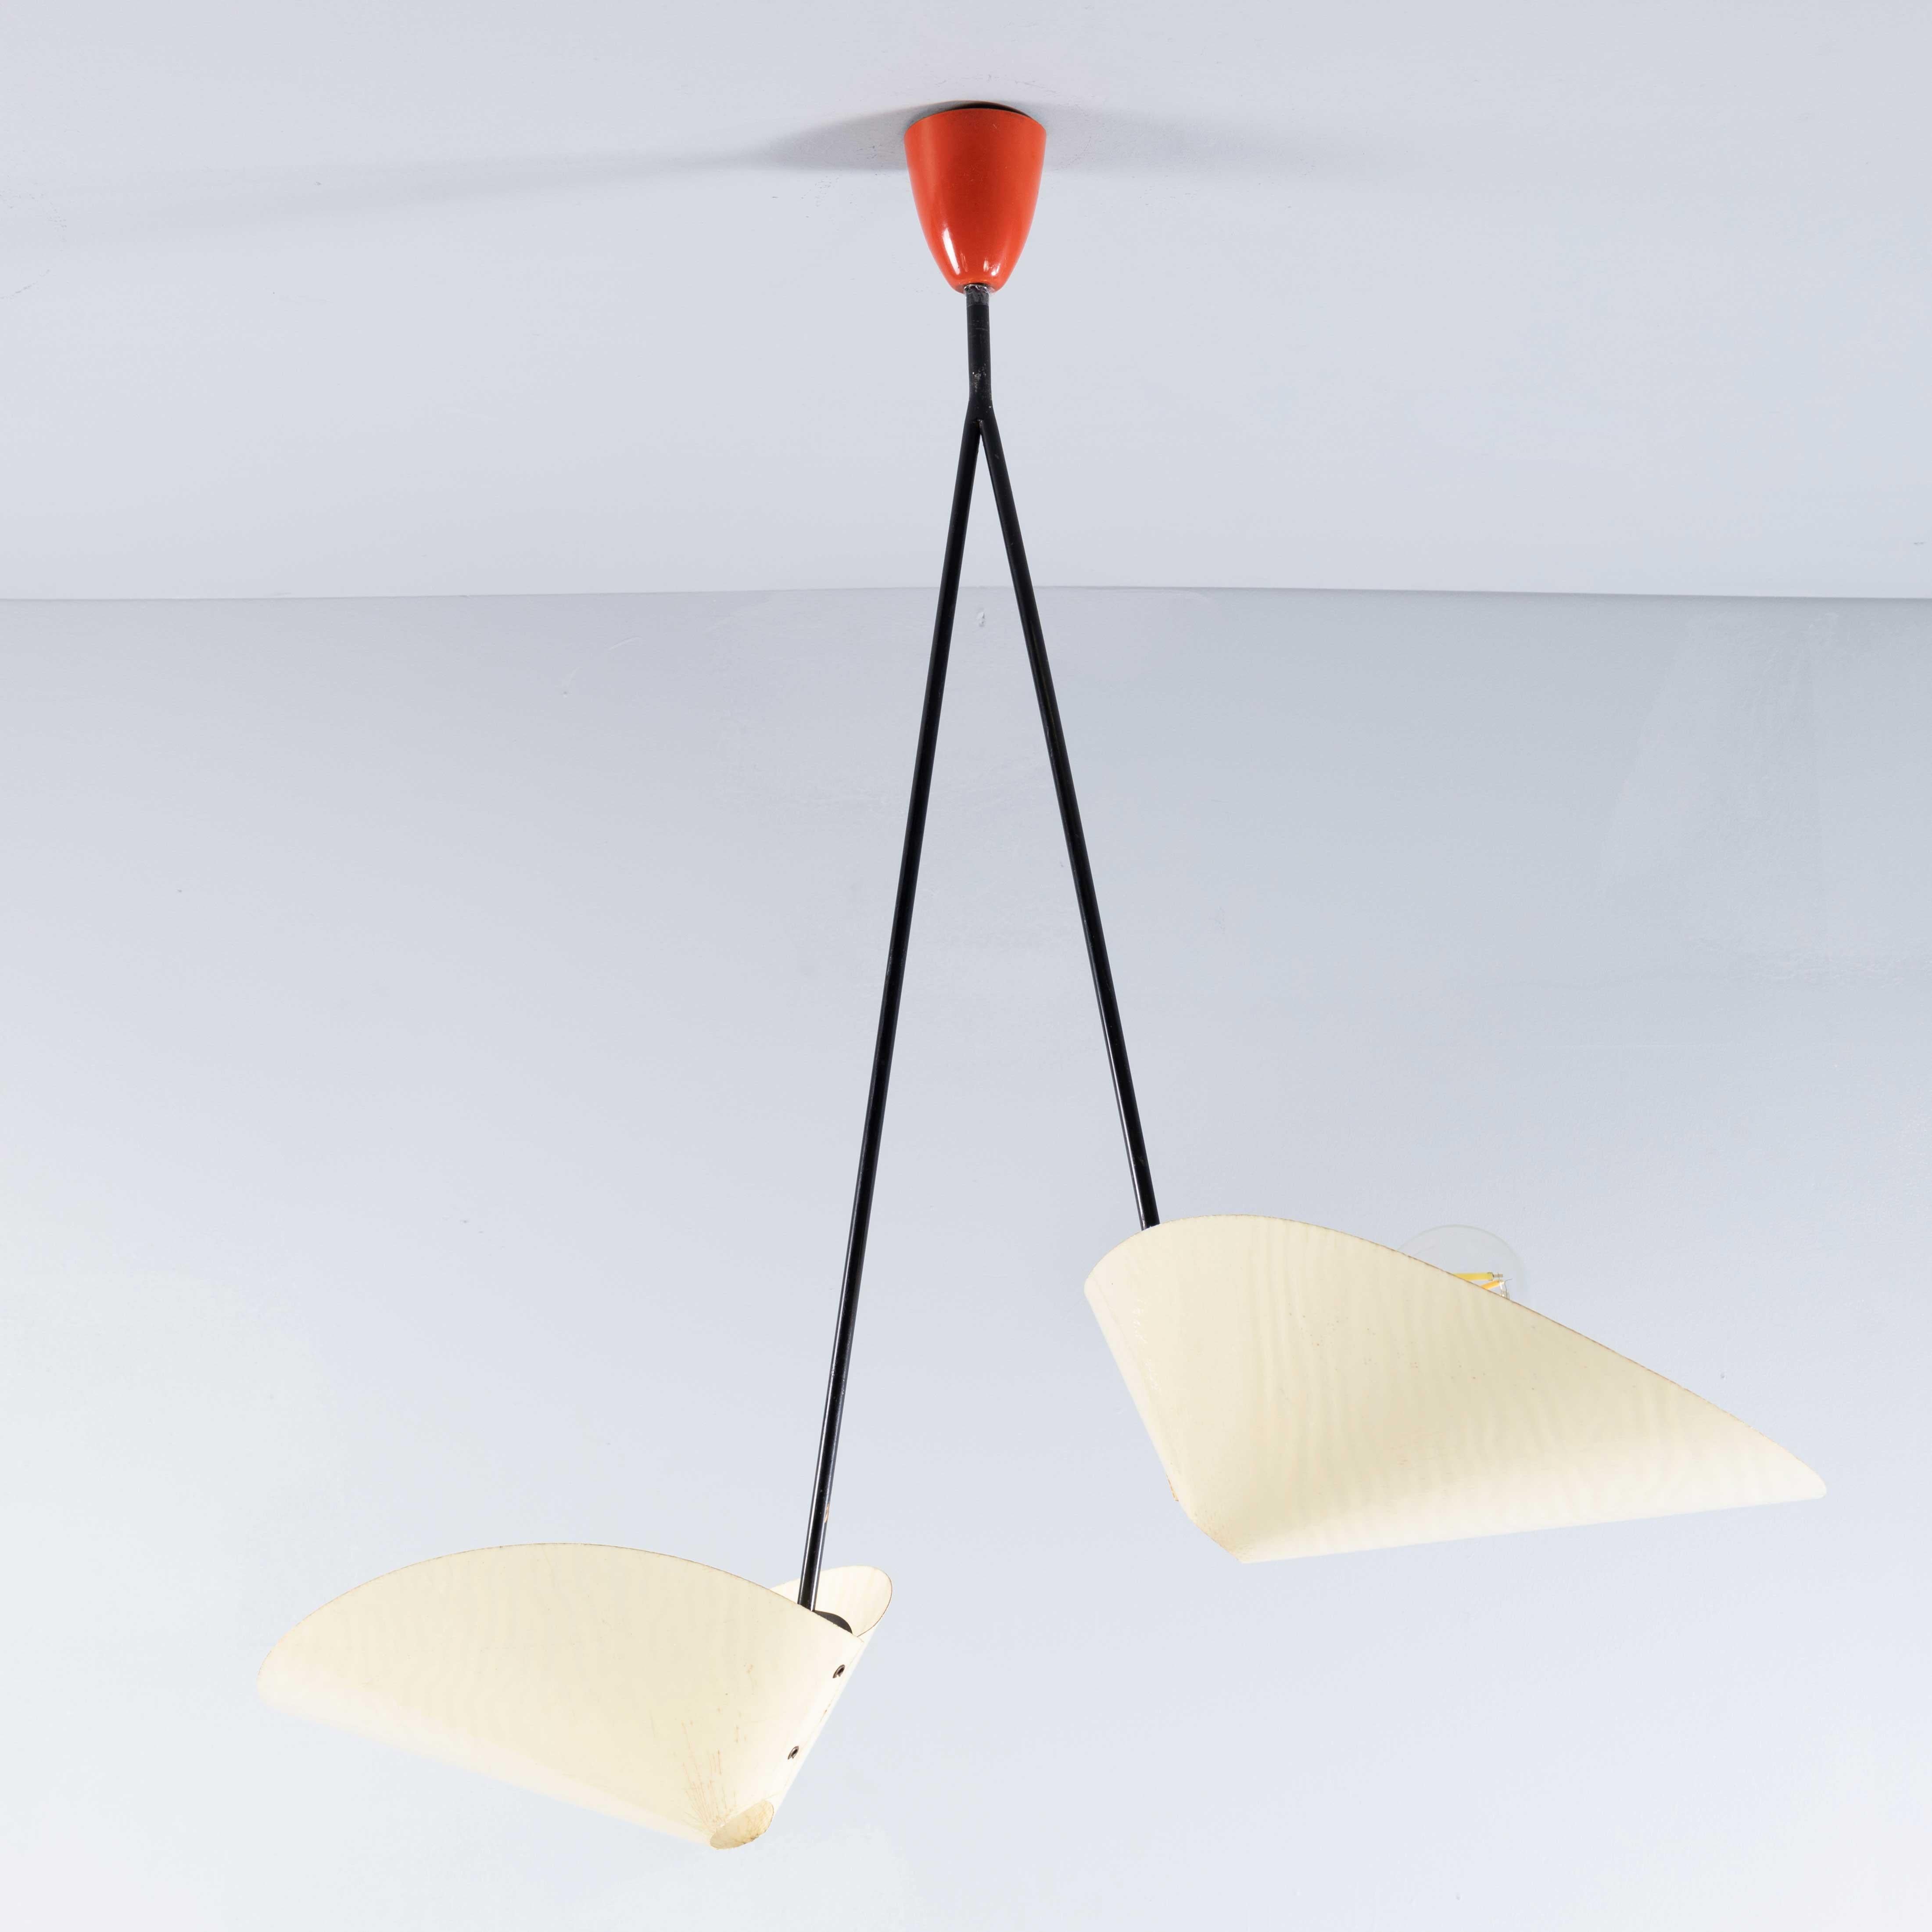 1950’s Suspended Hanging Paper Pendant Lamps – Pair
1950’s Suspended Hanging Paper Pendant Lamps – Pair. Good simple hanging pendant with two faux paper shades throwing a dappled light to the ceiling and themselves emitting a warm glow. The faux